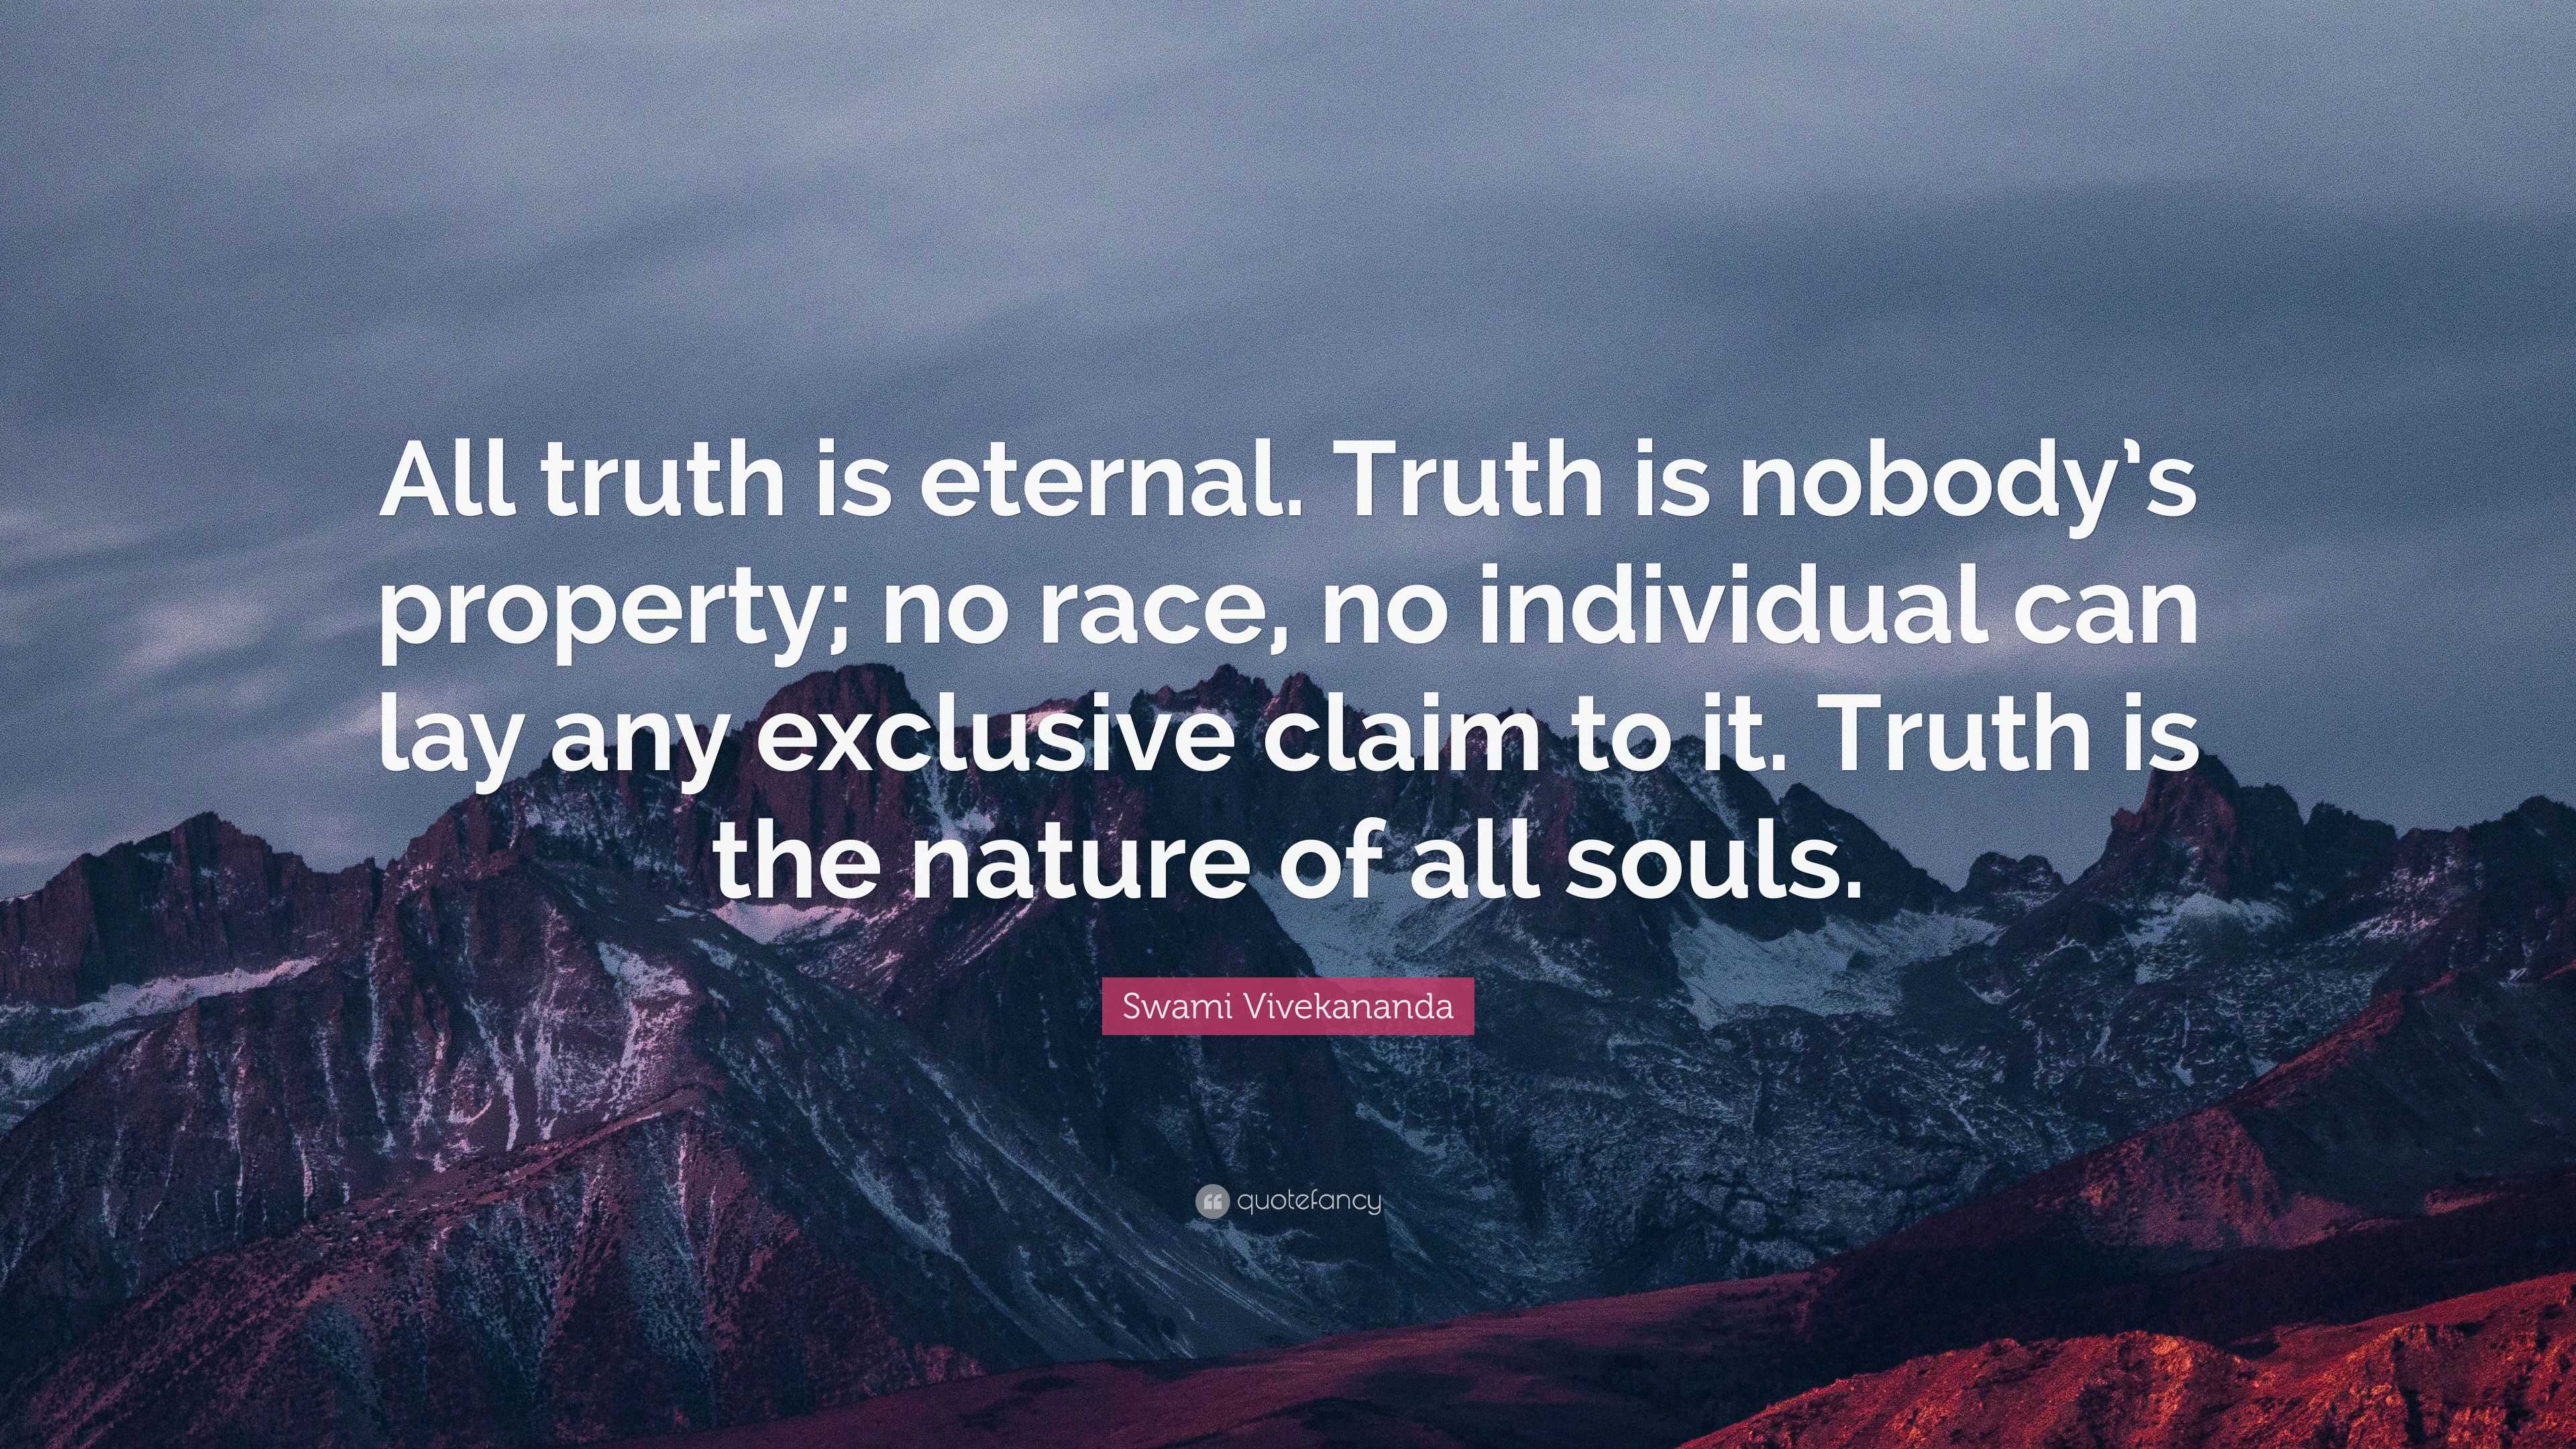 Swami Vivekananda Quote: “All truth is eternal. Truth is nobody’s ...